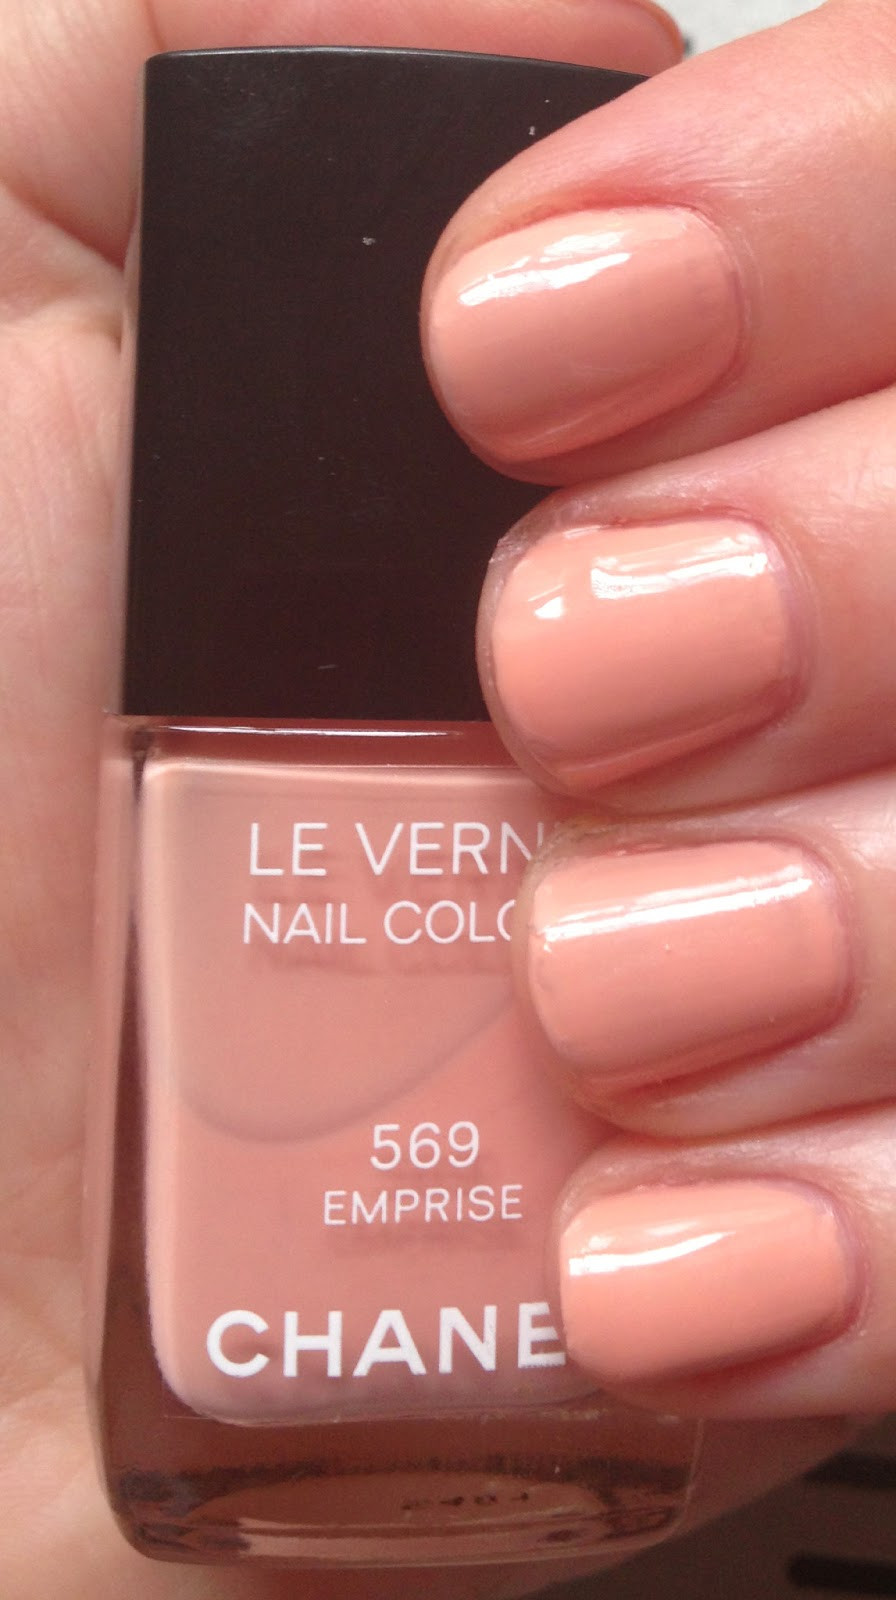 Chanel Nail Colors
 The Beauty of Life Chanel 2013 Spring Couture Nail Polish